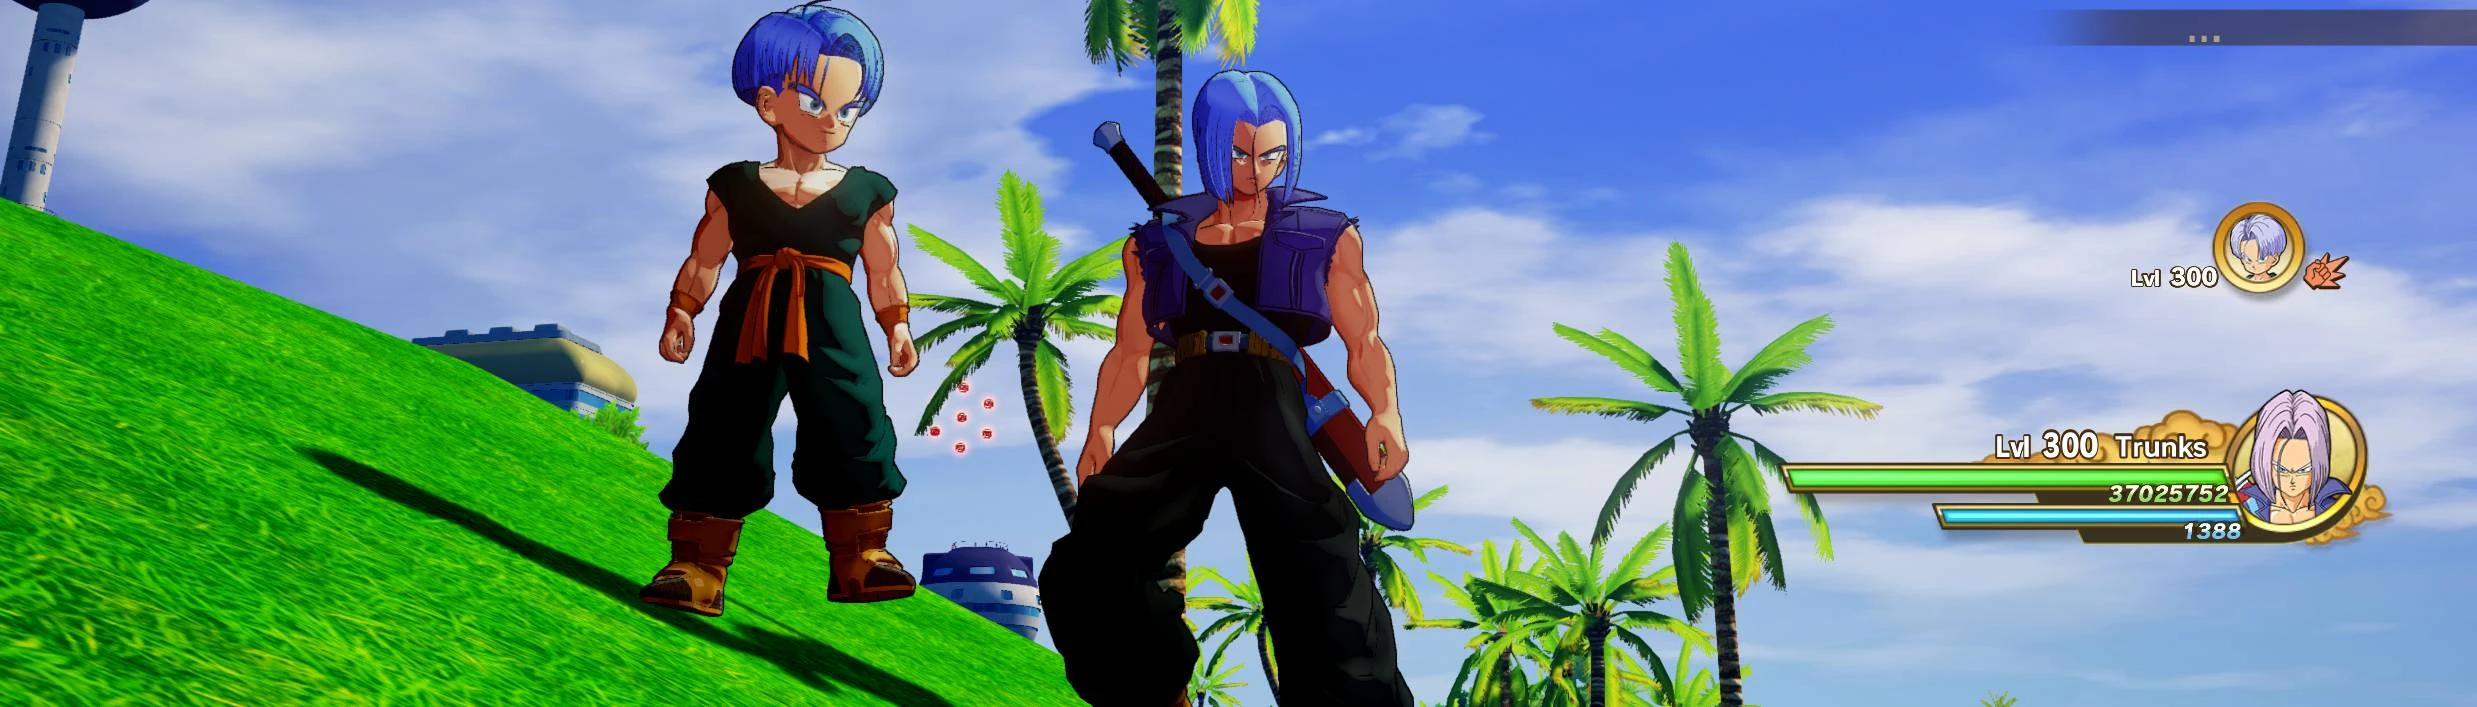 To Xenoverse Modders: I've got several different hair mods to drag